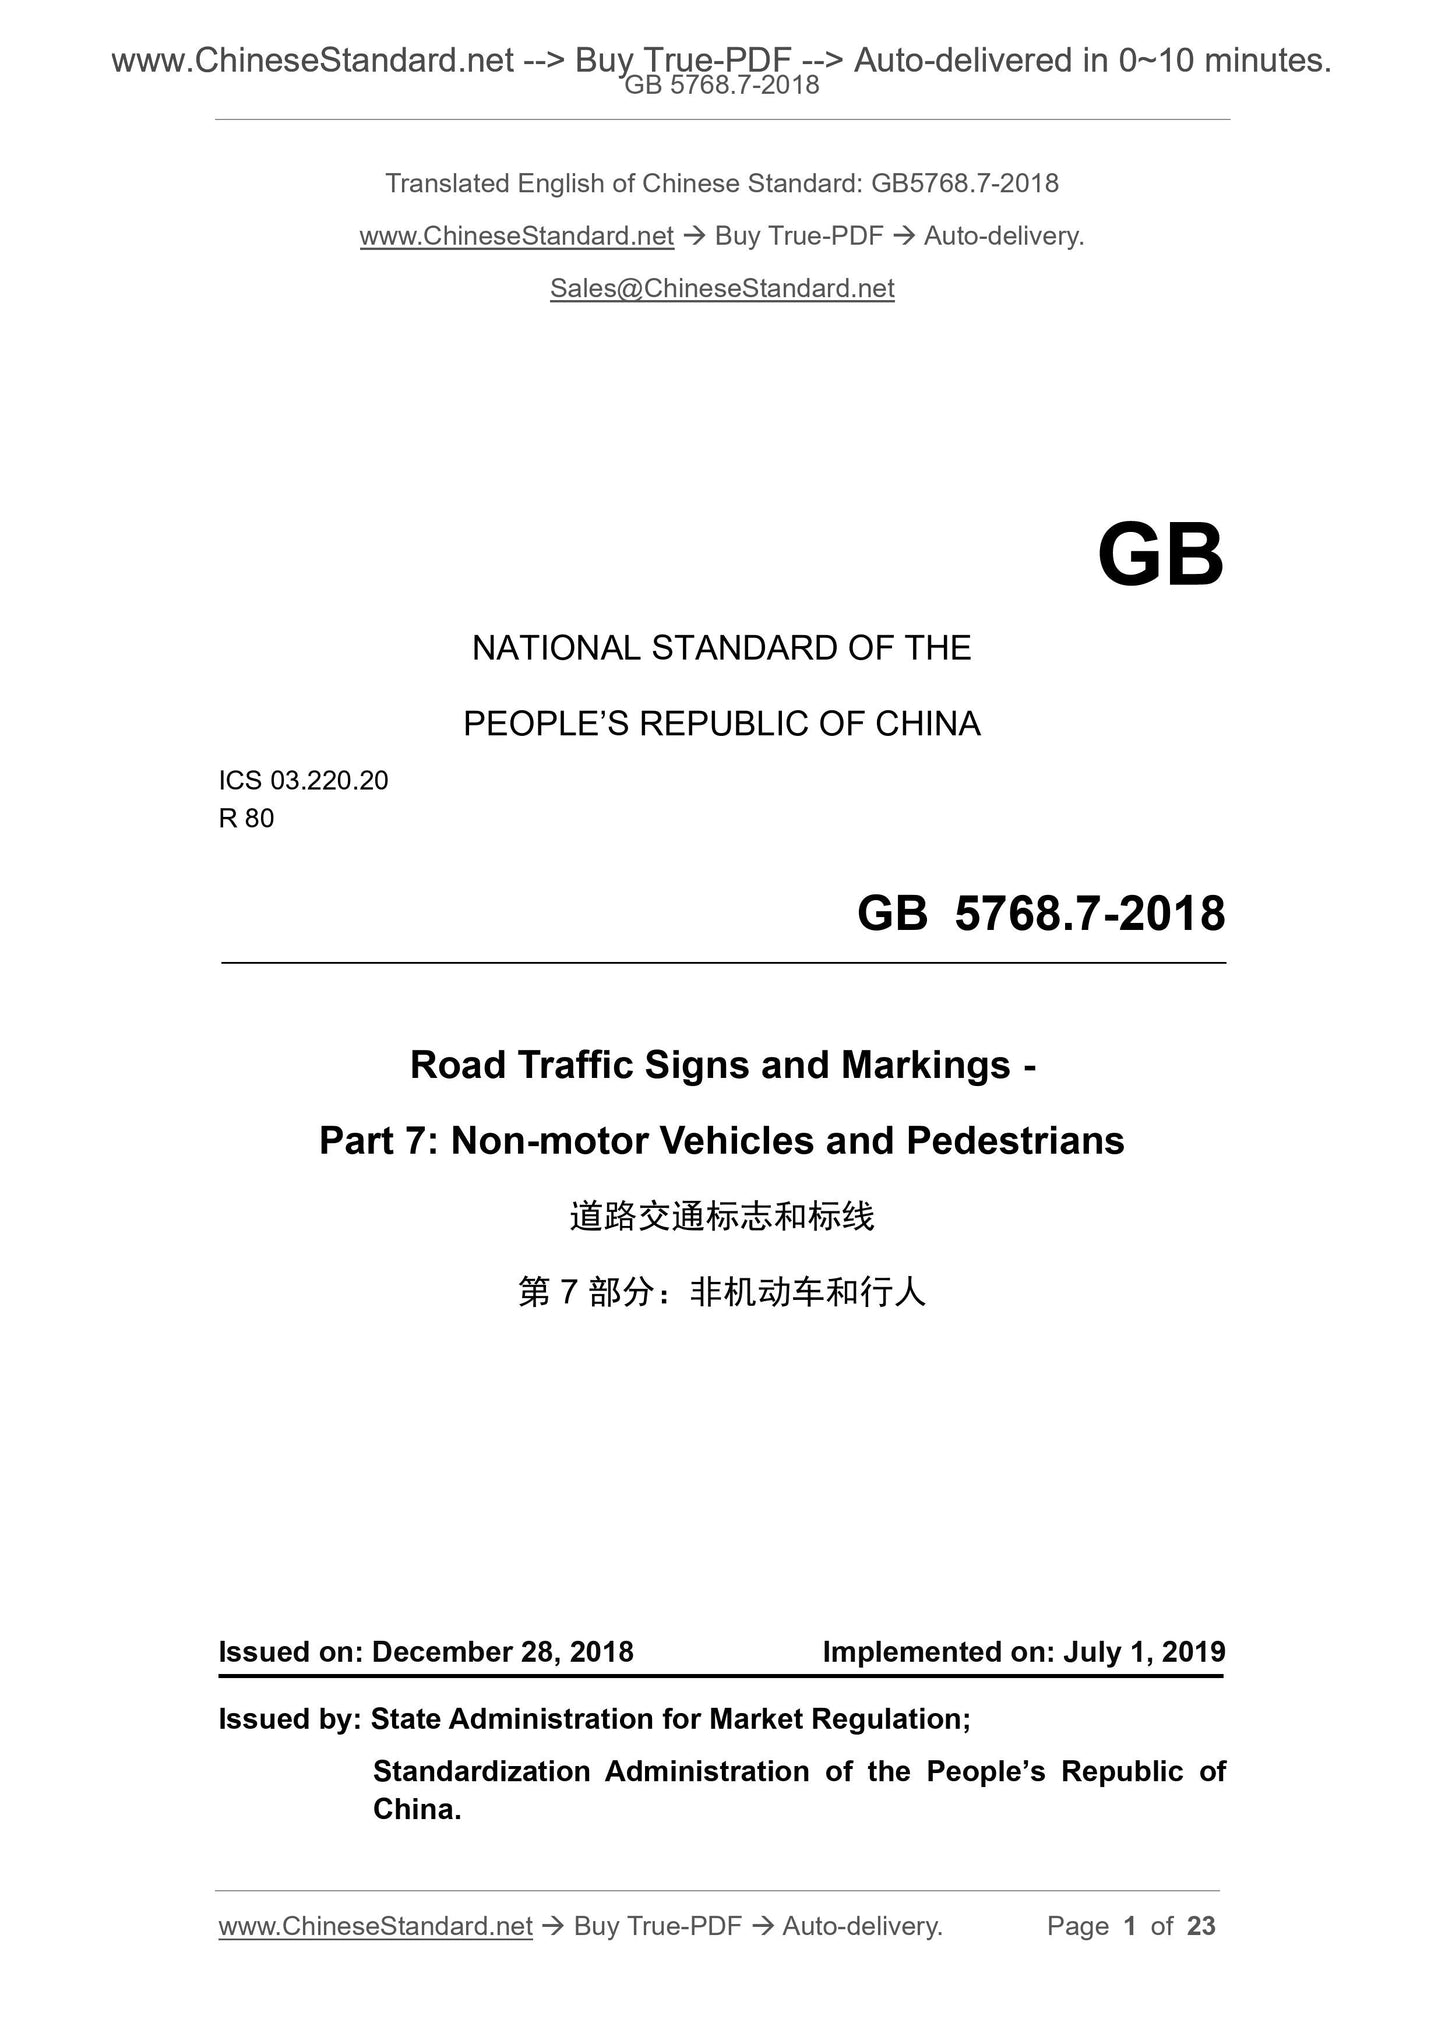 GB 5768.7-2018 Page 1